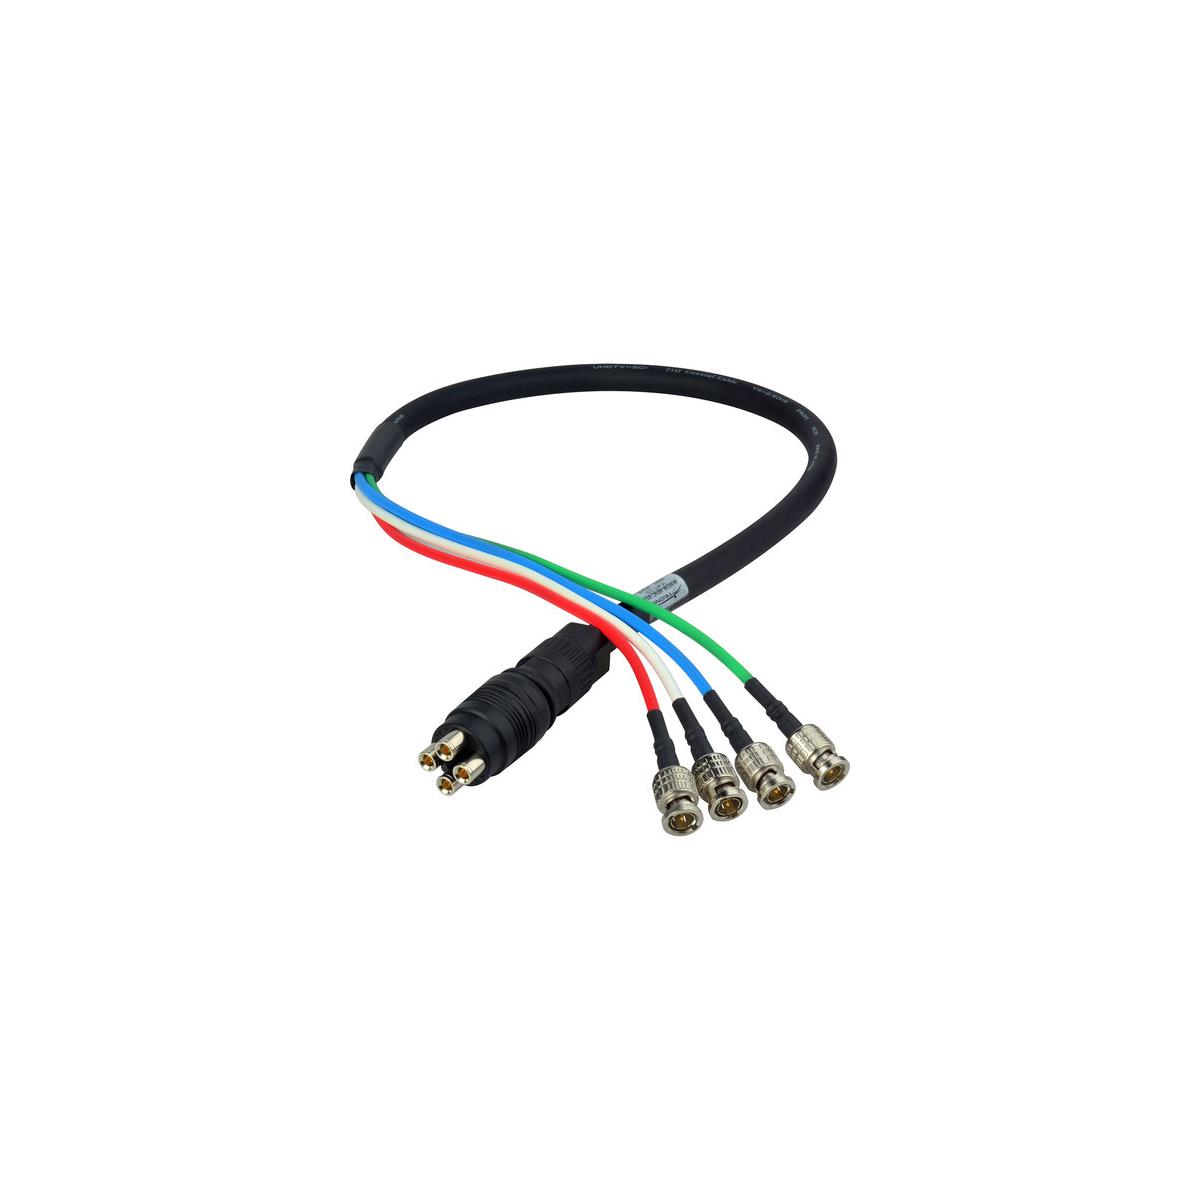 Laird 3' 4K UHD 3G HD-SDI 4-Channel DIN Male to BNC Camera Breakout Cable <b> 4-3G HD-SDI Signal Channel Quick Connect System for 4K/UHD Video Formats </b>One step, quick-connect Laird coax Canare cable assemblies connect 4 channels of 3G HD-SDI signals for 4K/UHD video formats. The Laird cables are assembled with Canare 4 channel, V4-2.5CHW flexible coaxial cable, allowing a break out to 4 Canare BNC or 4 DIN connectors. The Canare male connector, MDM-V4C25HW is designed to mate with the MDF-V4JRU panel mount receptacle which features a 4 DIN pass-through on the back side to increase your connectivity but not your rack space. Laird 4K UHD Canare camera cables assemblies make quick work of keeping everything in line and organized. Available in a variety of lengths. Use with the Canare MDF-V4JRU 4K DIN 1.0/2.3 4-channel chassis mount connector.• Quick connect and disconnect• Multiple 3G-SDI signals to 4K/UHD formats• Canare cable with solid and lightweight nylon resin body• Push-pull locking Canare coax connectors with protective rubber boots• High performance Canare BCP-B25HW BNC or 4 DCP-C25HD DIN connectors• Made in the USA in a Canare trained fiber shop• Canare V4-2.5CHW 4-Channel 4K 75Ohms Coaxial Cable• 4 DIN 1.0/2.3 connectors• MDF-V4JRU accepts MDM-V4C25HW and also DIN 1.0/2.3 plugs<b> Applications </b>• High density 3G-SDI• applications• Mobile trucks• Fly packs• Studios• 4K transmission• Consolidate HD-SDI lines